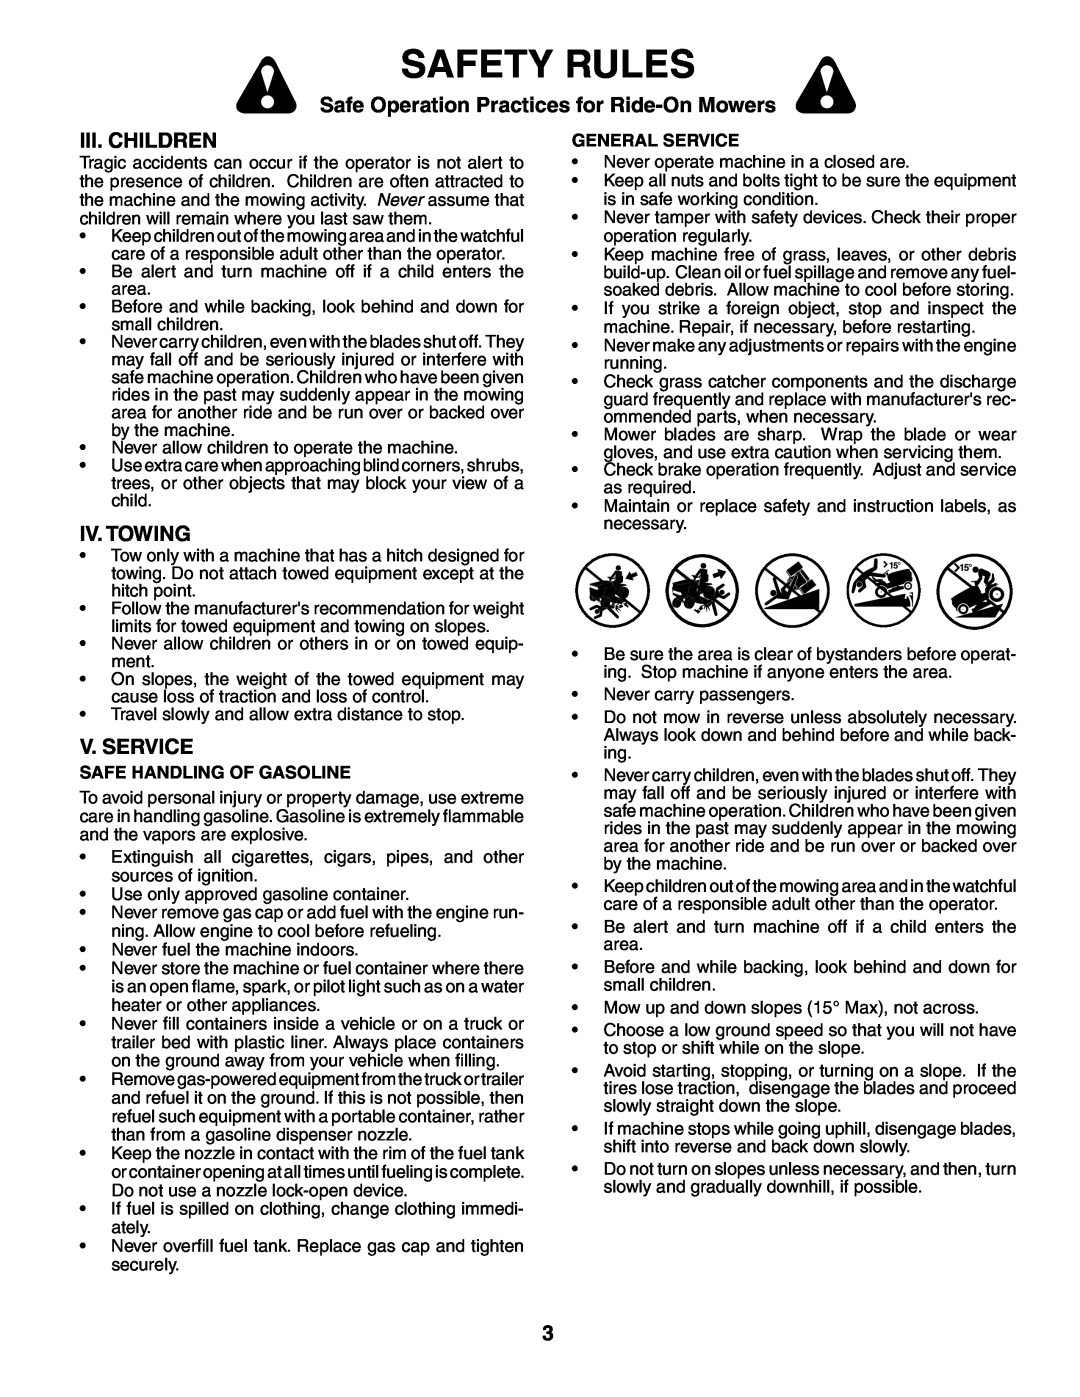 Poulan BB185H42YT manual Iii. Children, Iv. Towing, V. Service, Safety Rules, Safe Operation Practices for Ride-On Mowers 